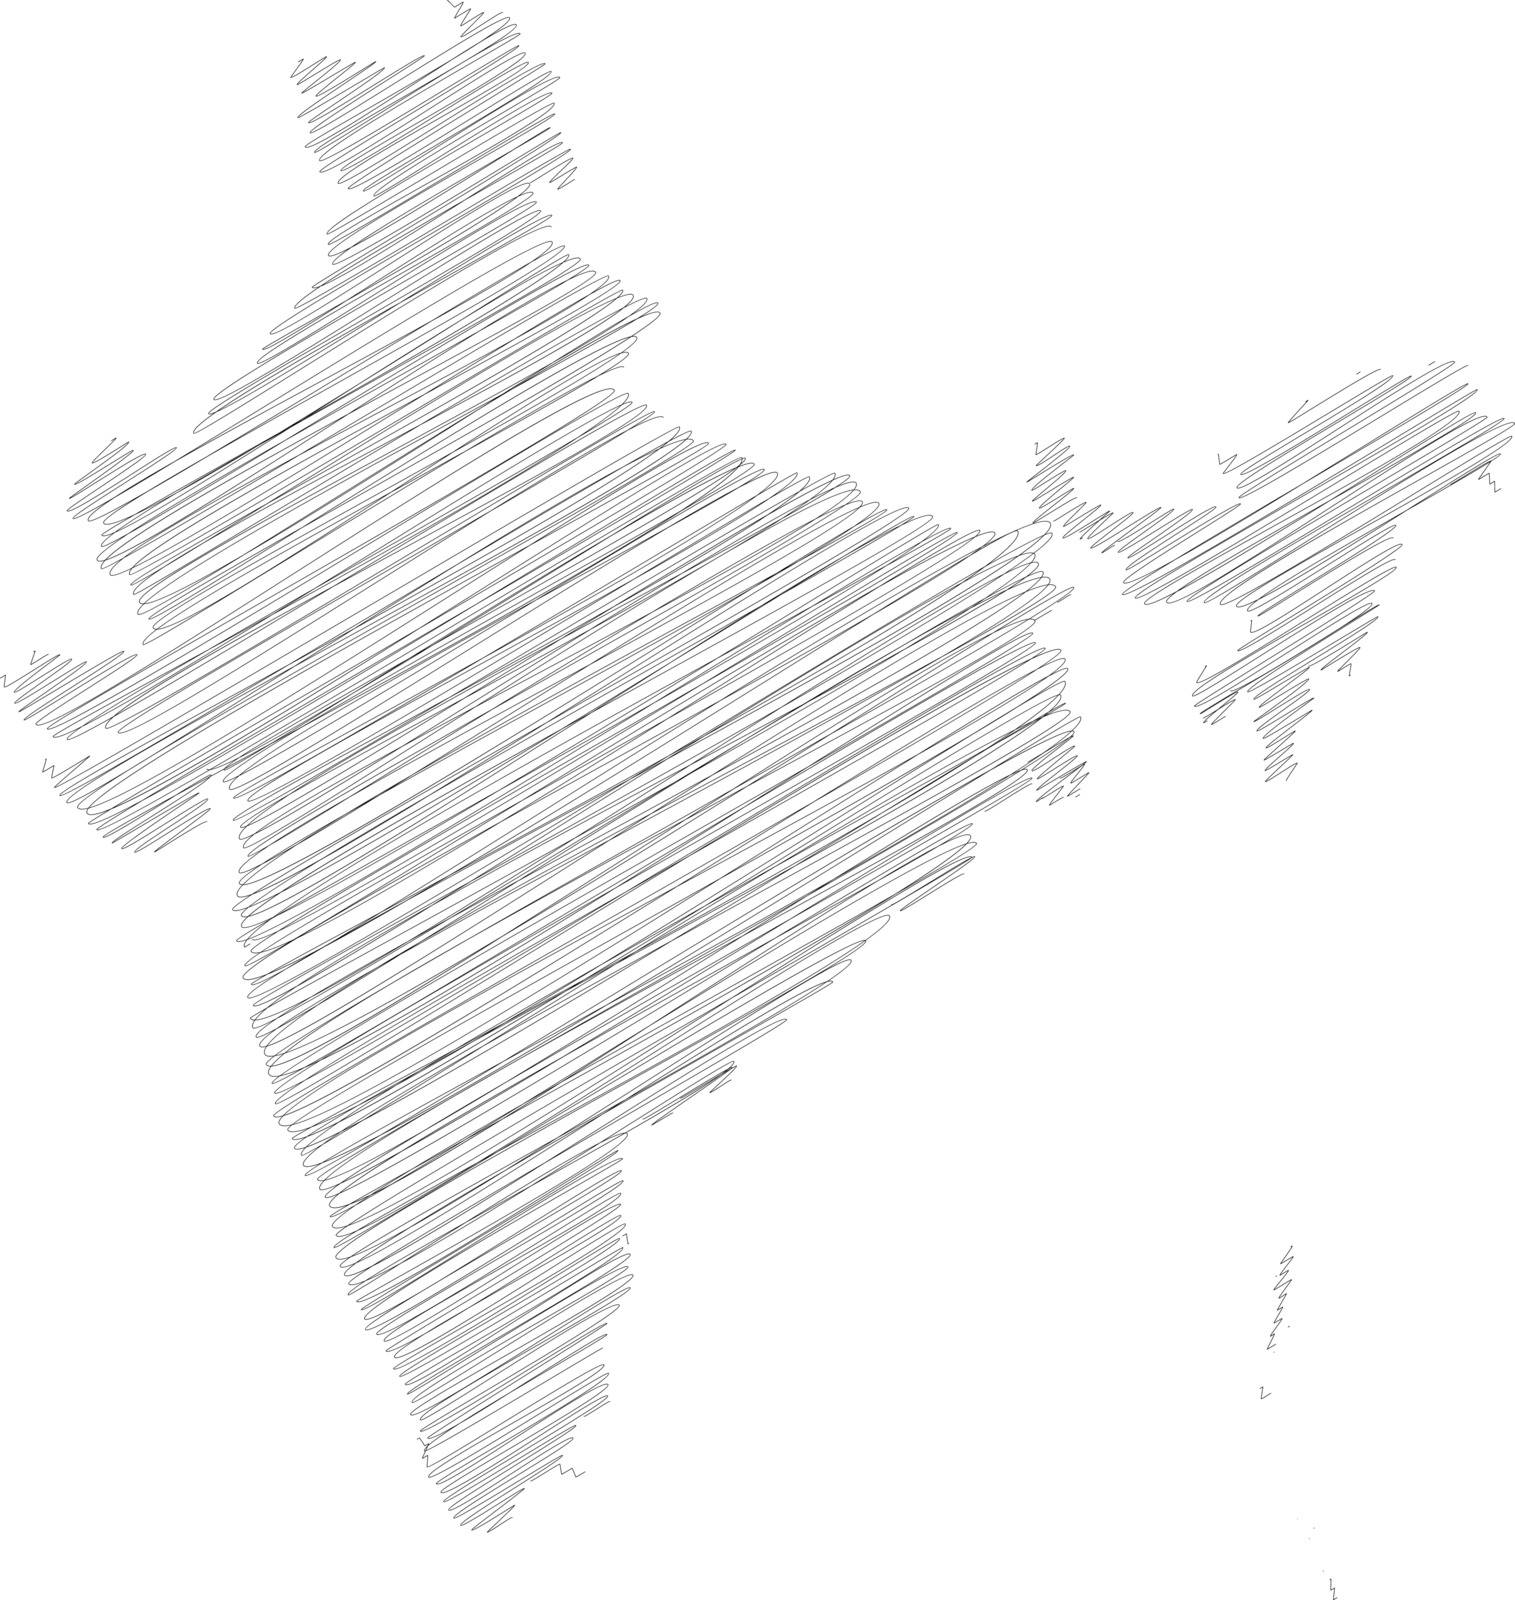 India - pencil scribble sketch silhouette map of country area with dropped shadow. Simple flat vector illustration.